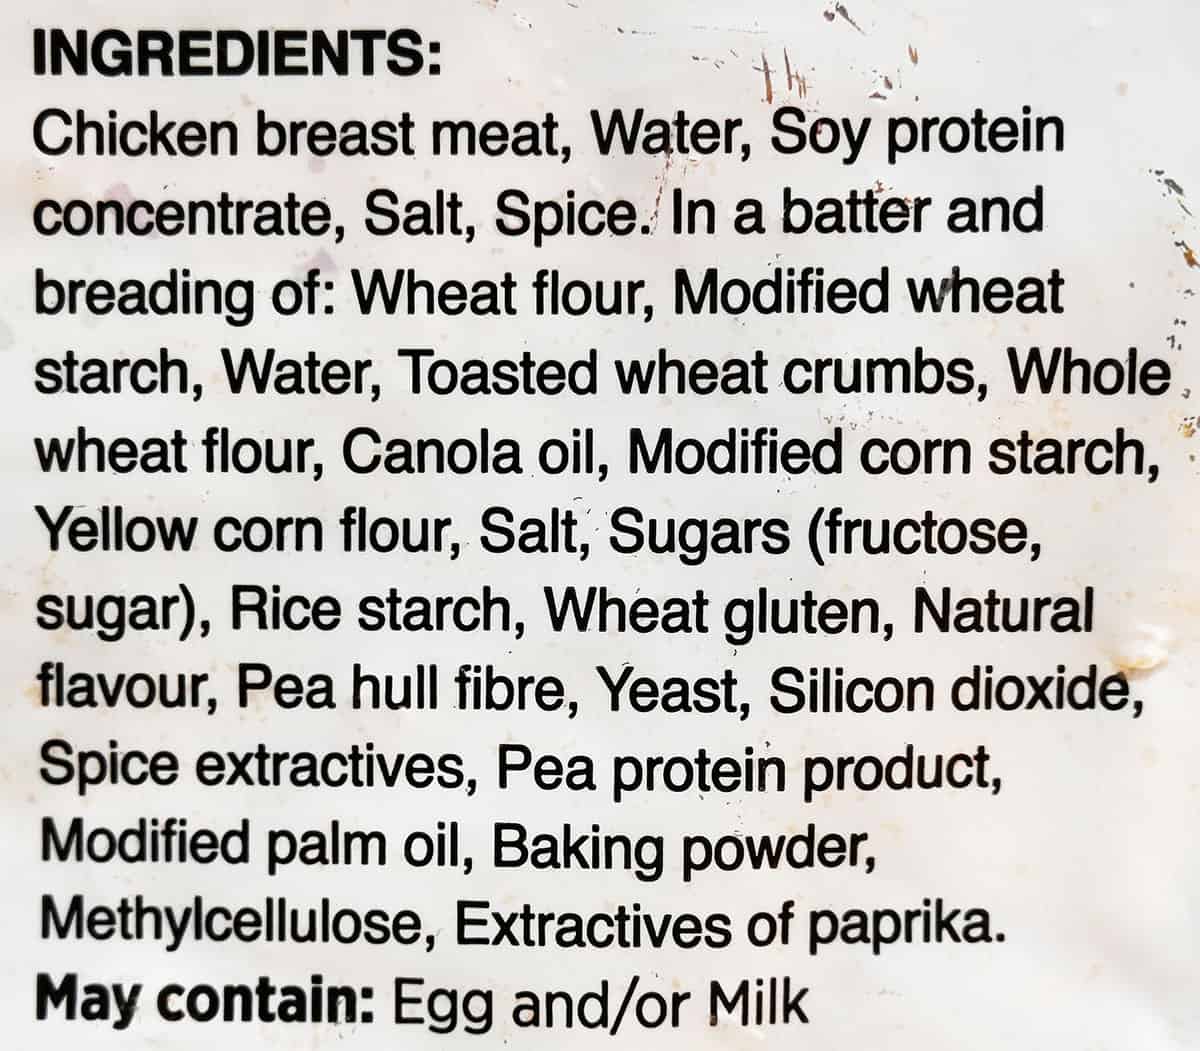 Ingredients list from the bag.